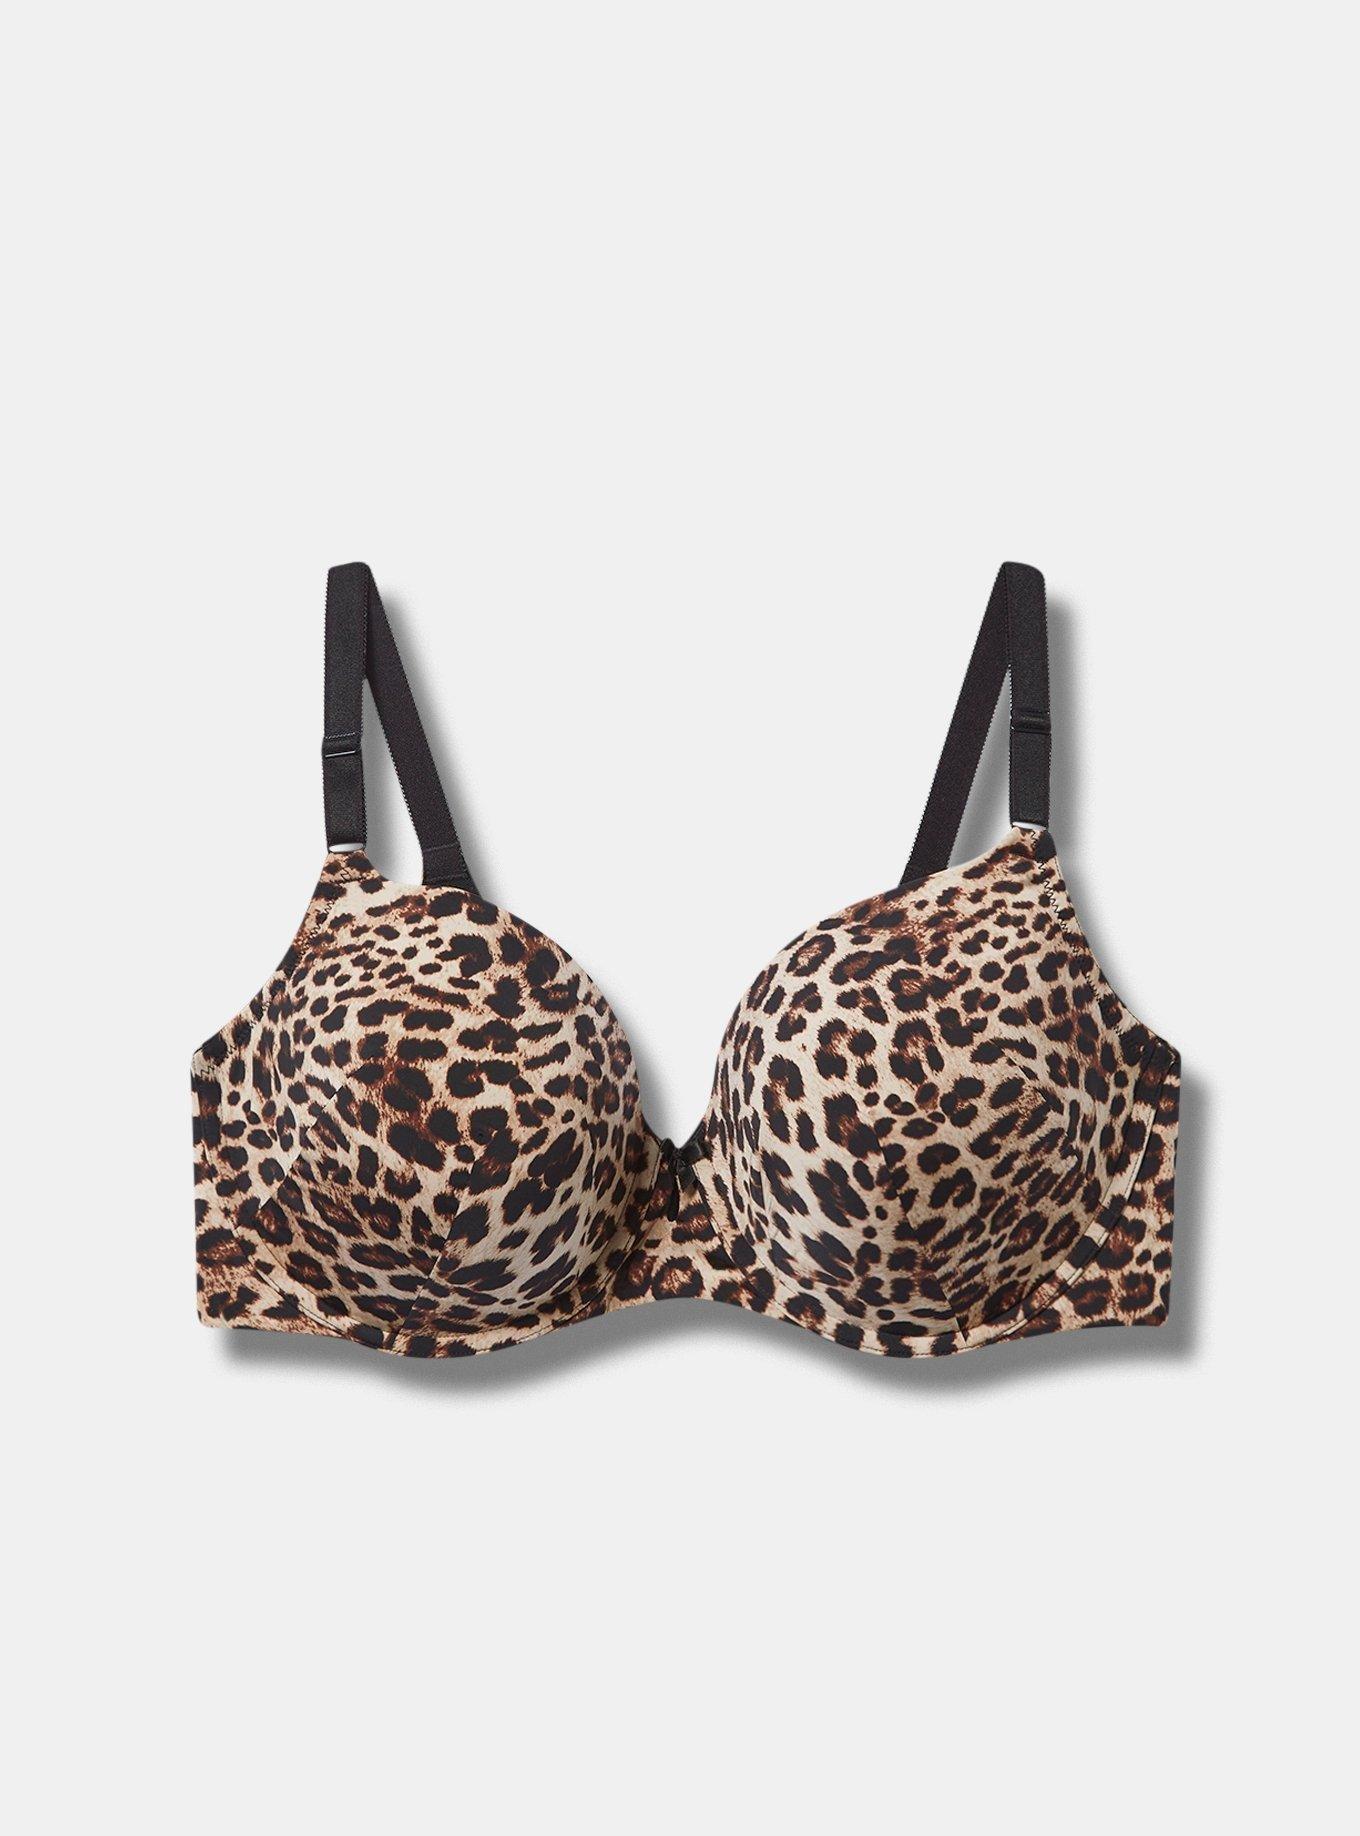 I'm a 46G and struggled with comfy bras for years, my $11